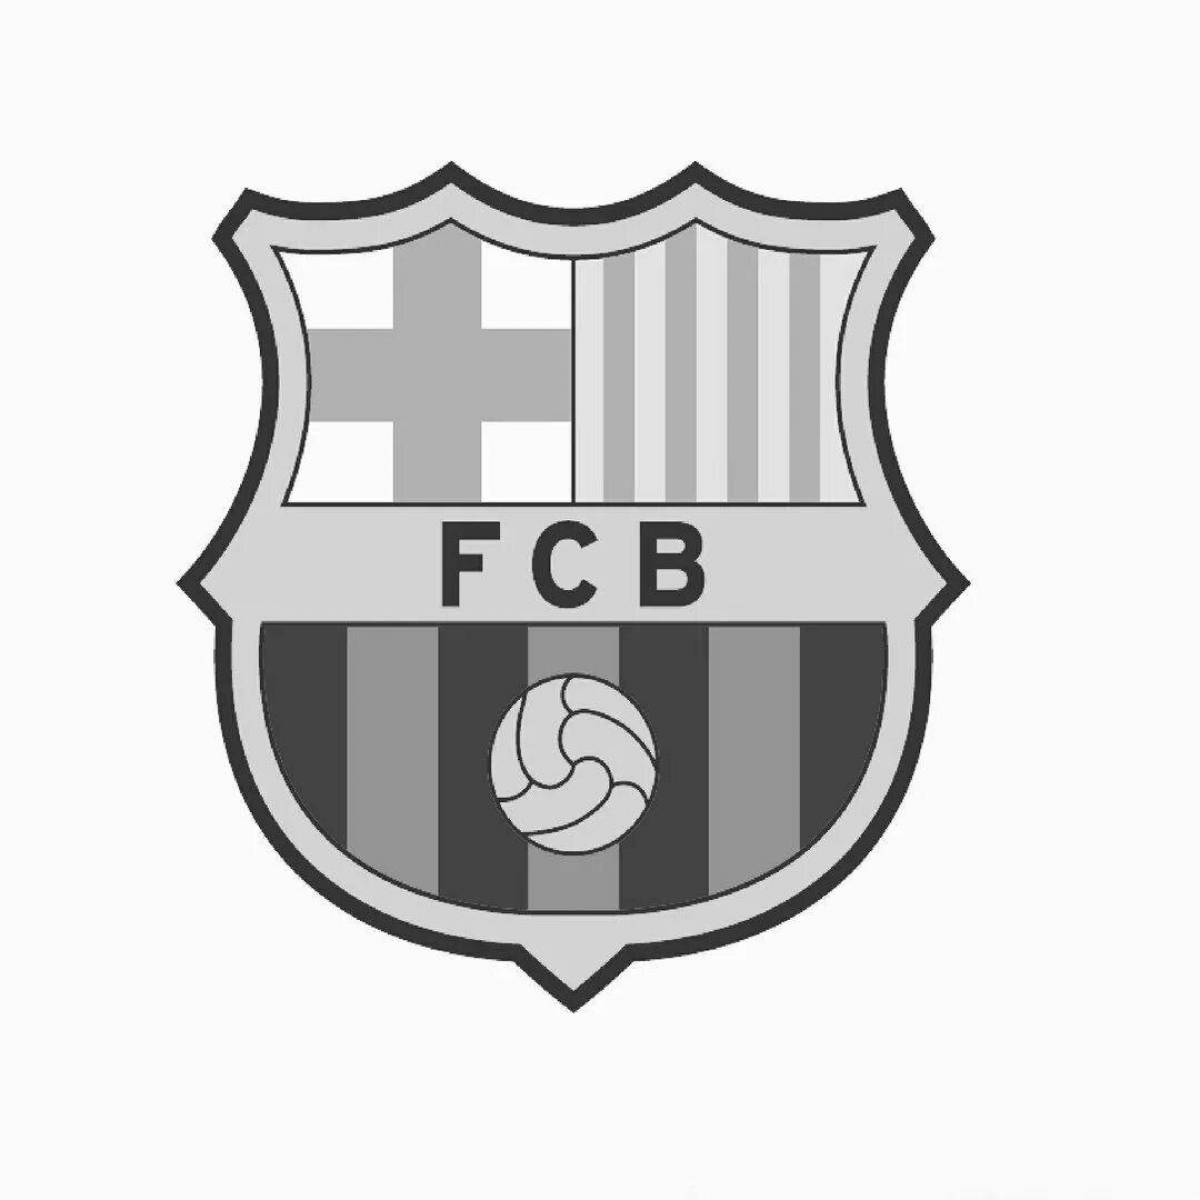 Great coloring book with Barcelona logo